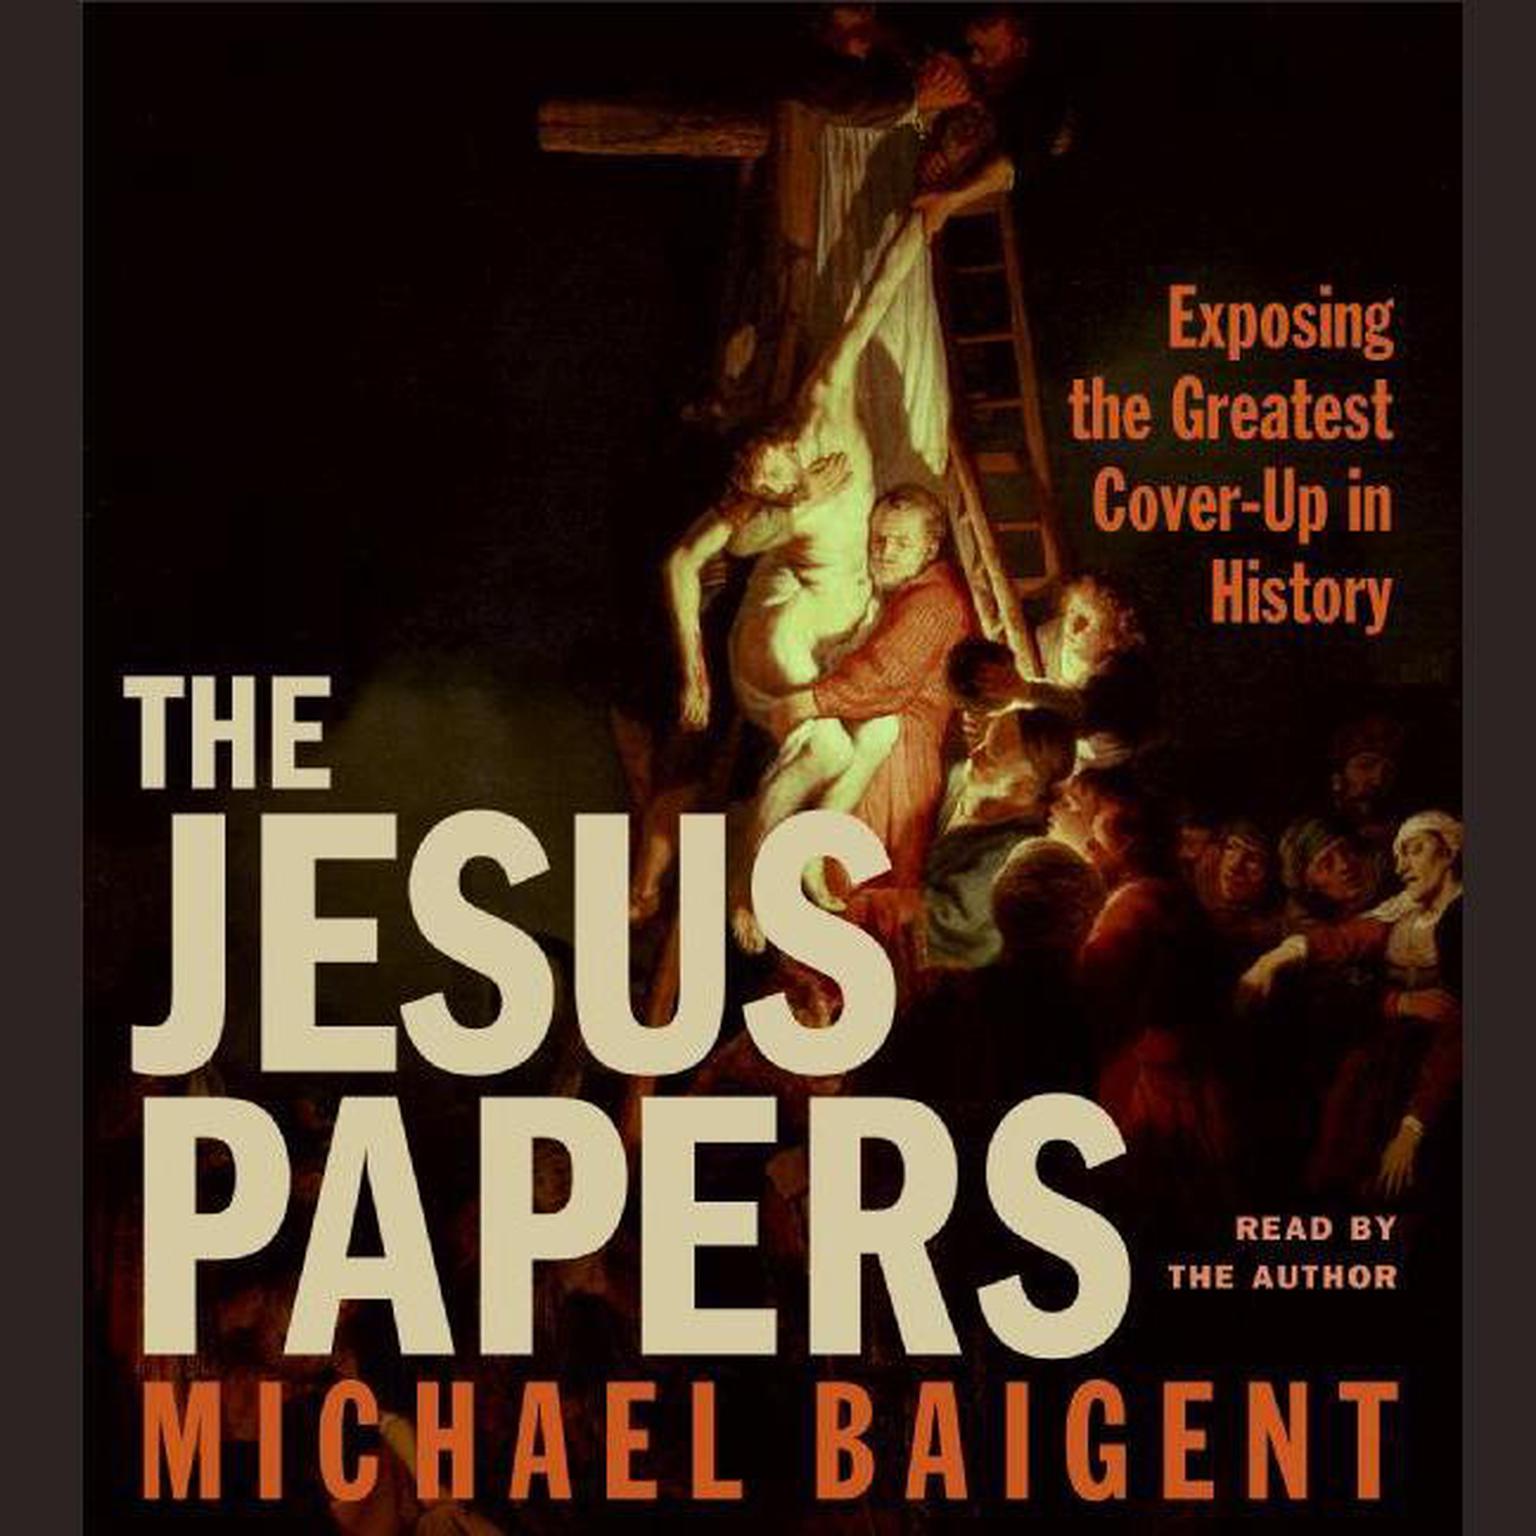 The Jesus Papers (Abridged): Exposing the Greatest Cover-Up in History Audiobook, by Michael Baigent